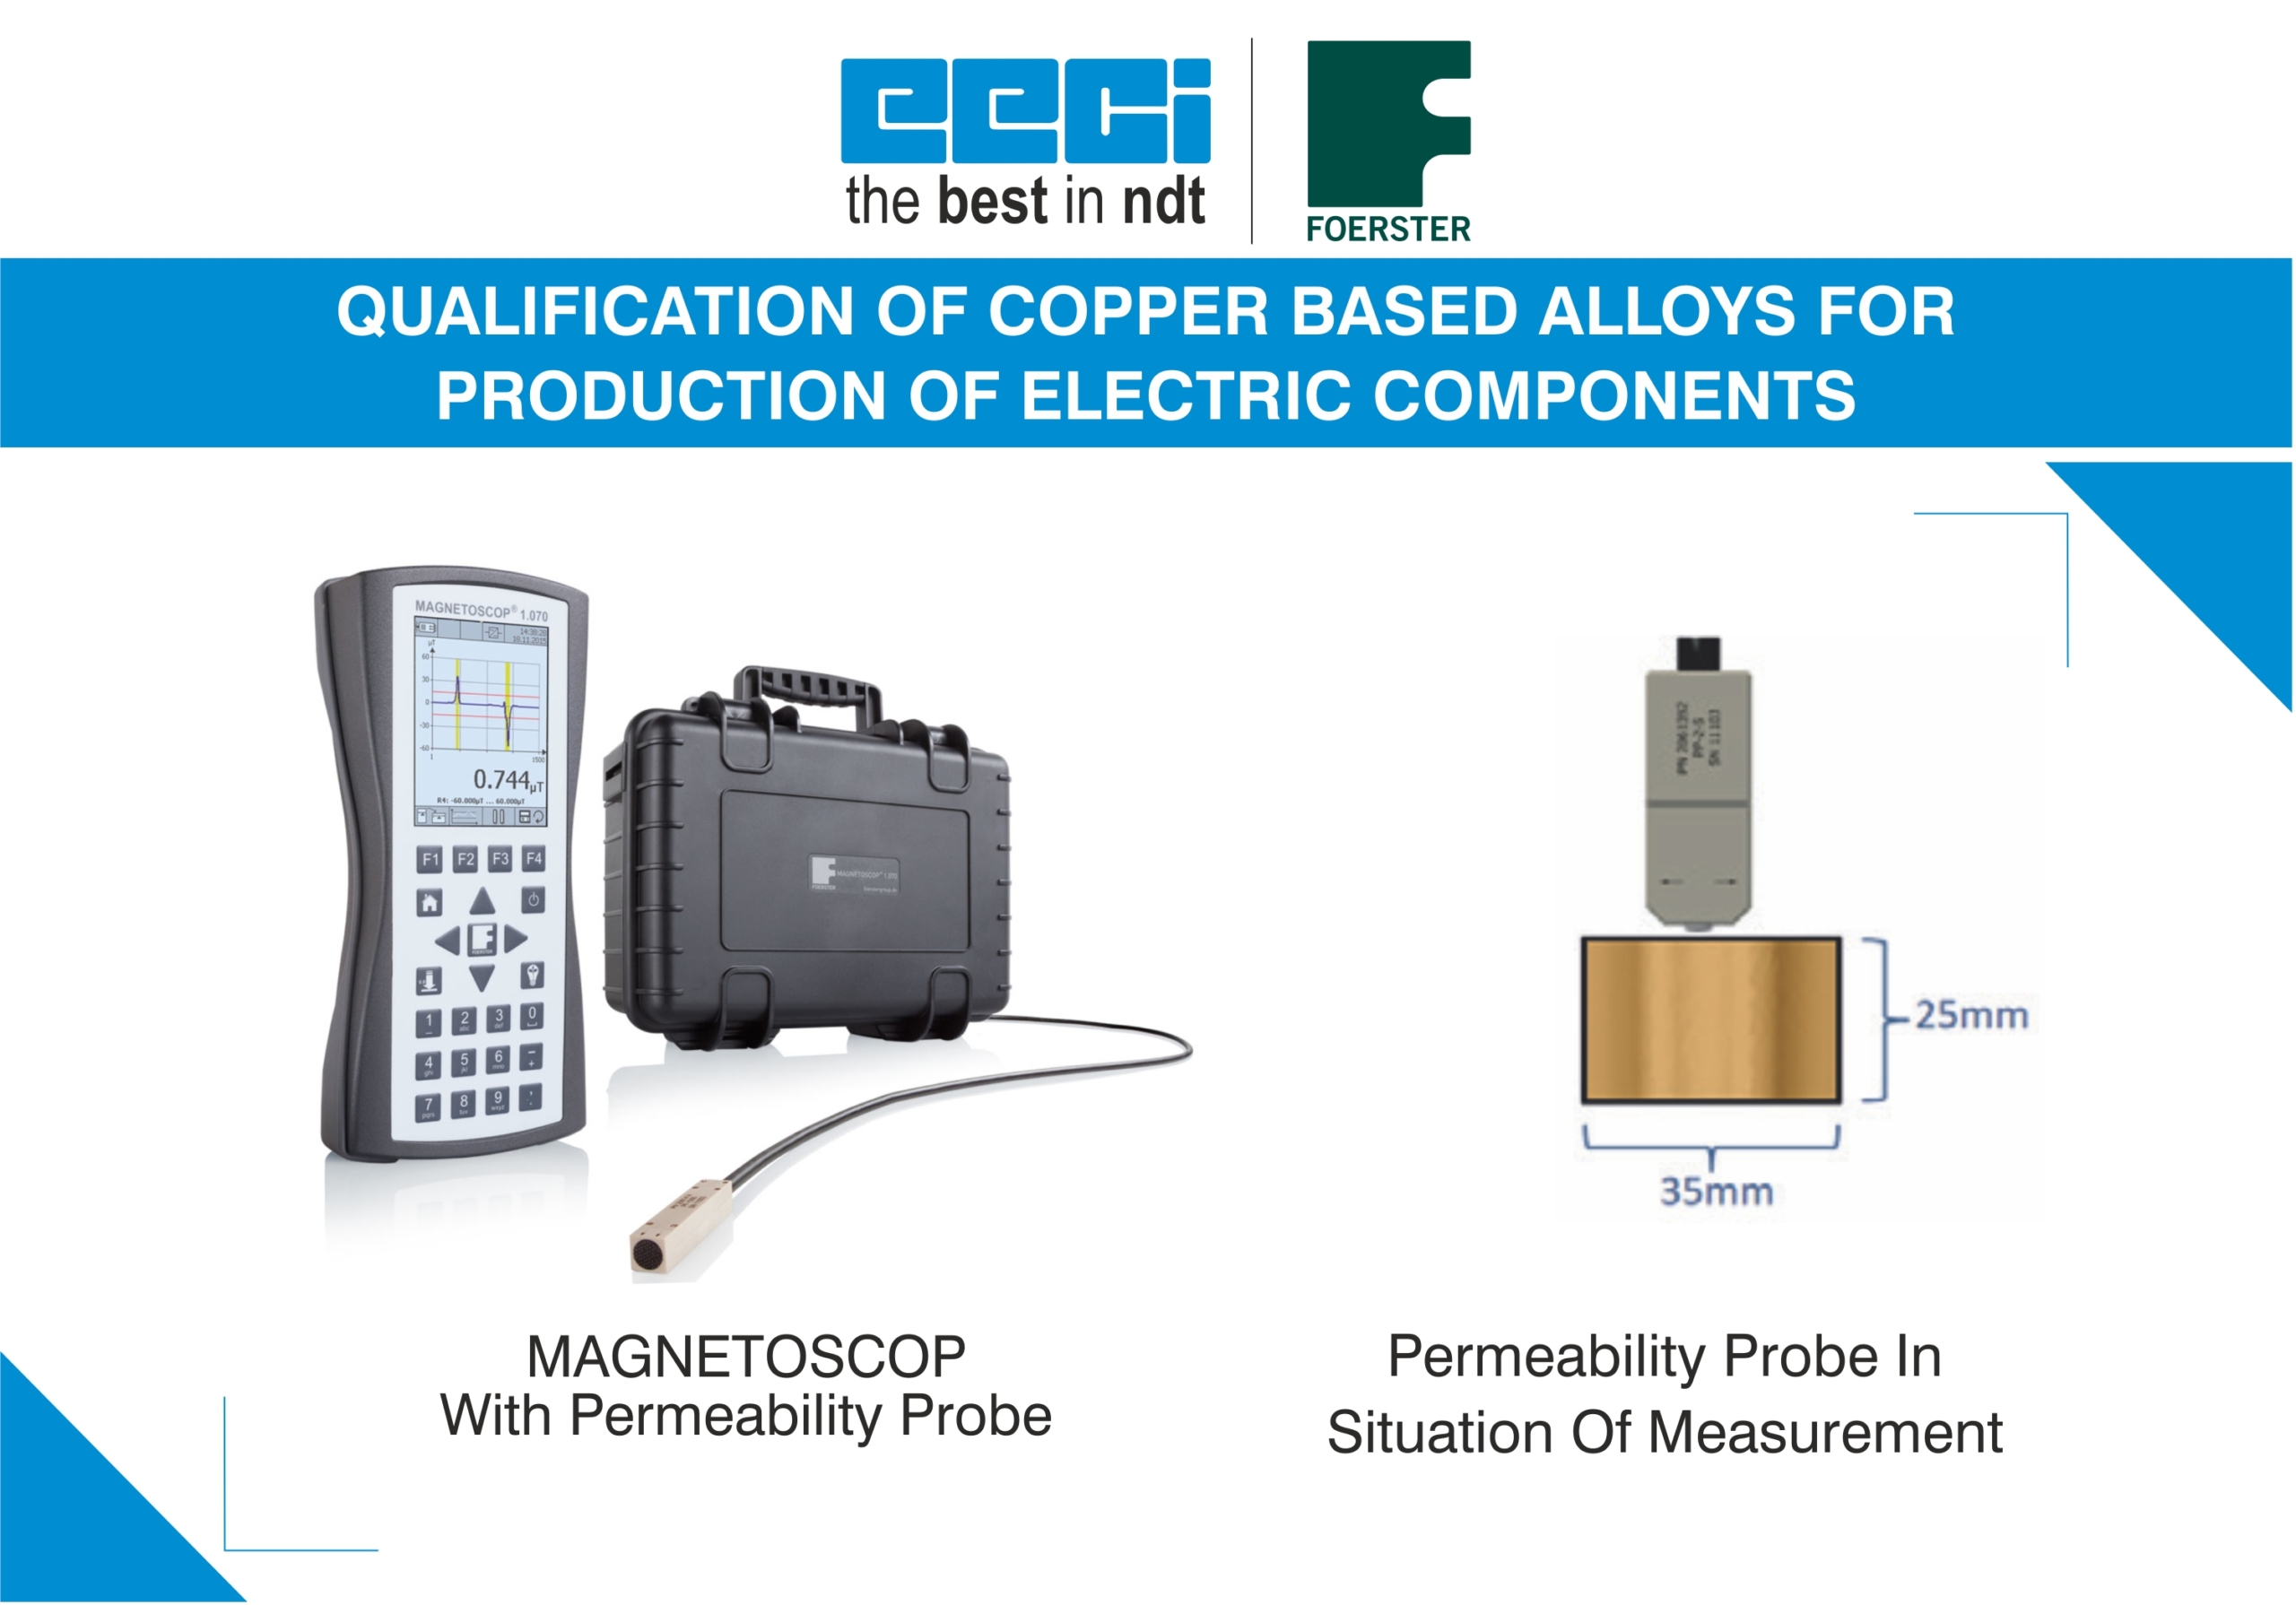 QUALIFICATION OF COPPER ALLOYS FOR PRODUCTION OF ELECTRIC COMPONENTS